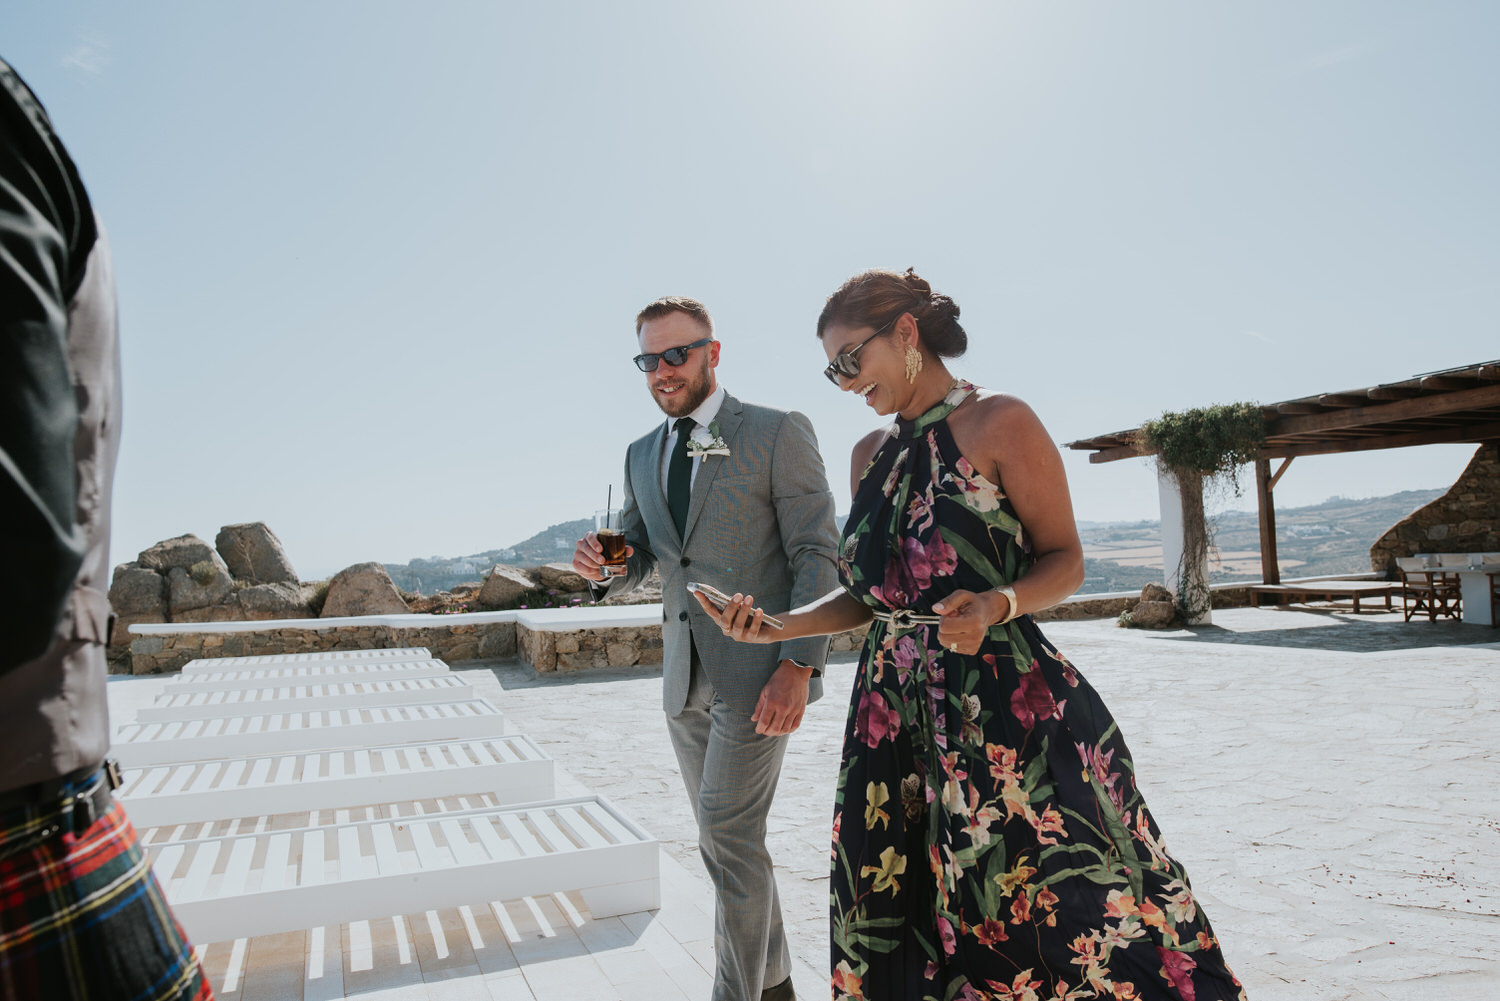 Mykonos wedding photographer: landscape photo of guests walking pass smiling in the afternoon sun.